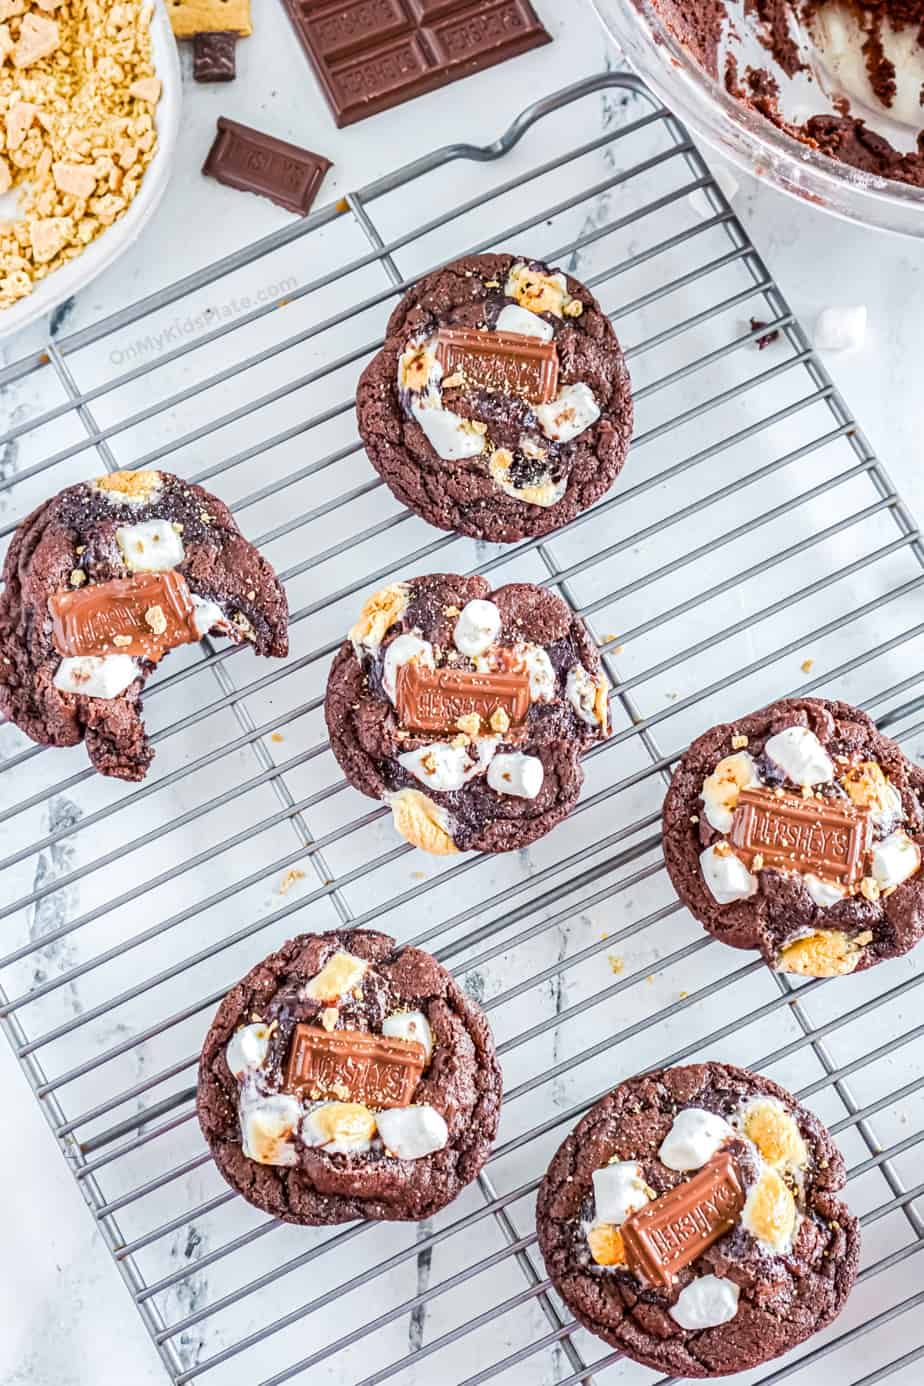 Chocolate S'mores cookies cooling on a rack, one has a bite missing.